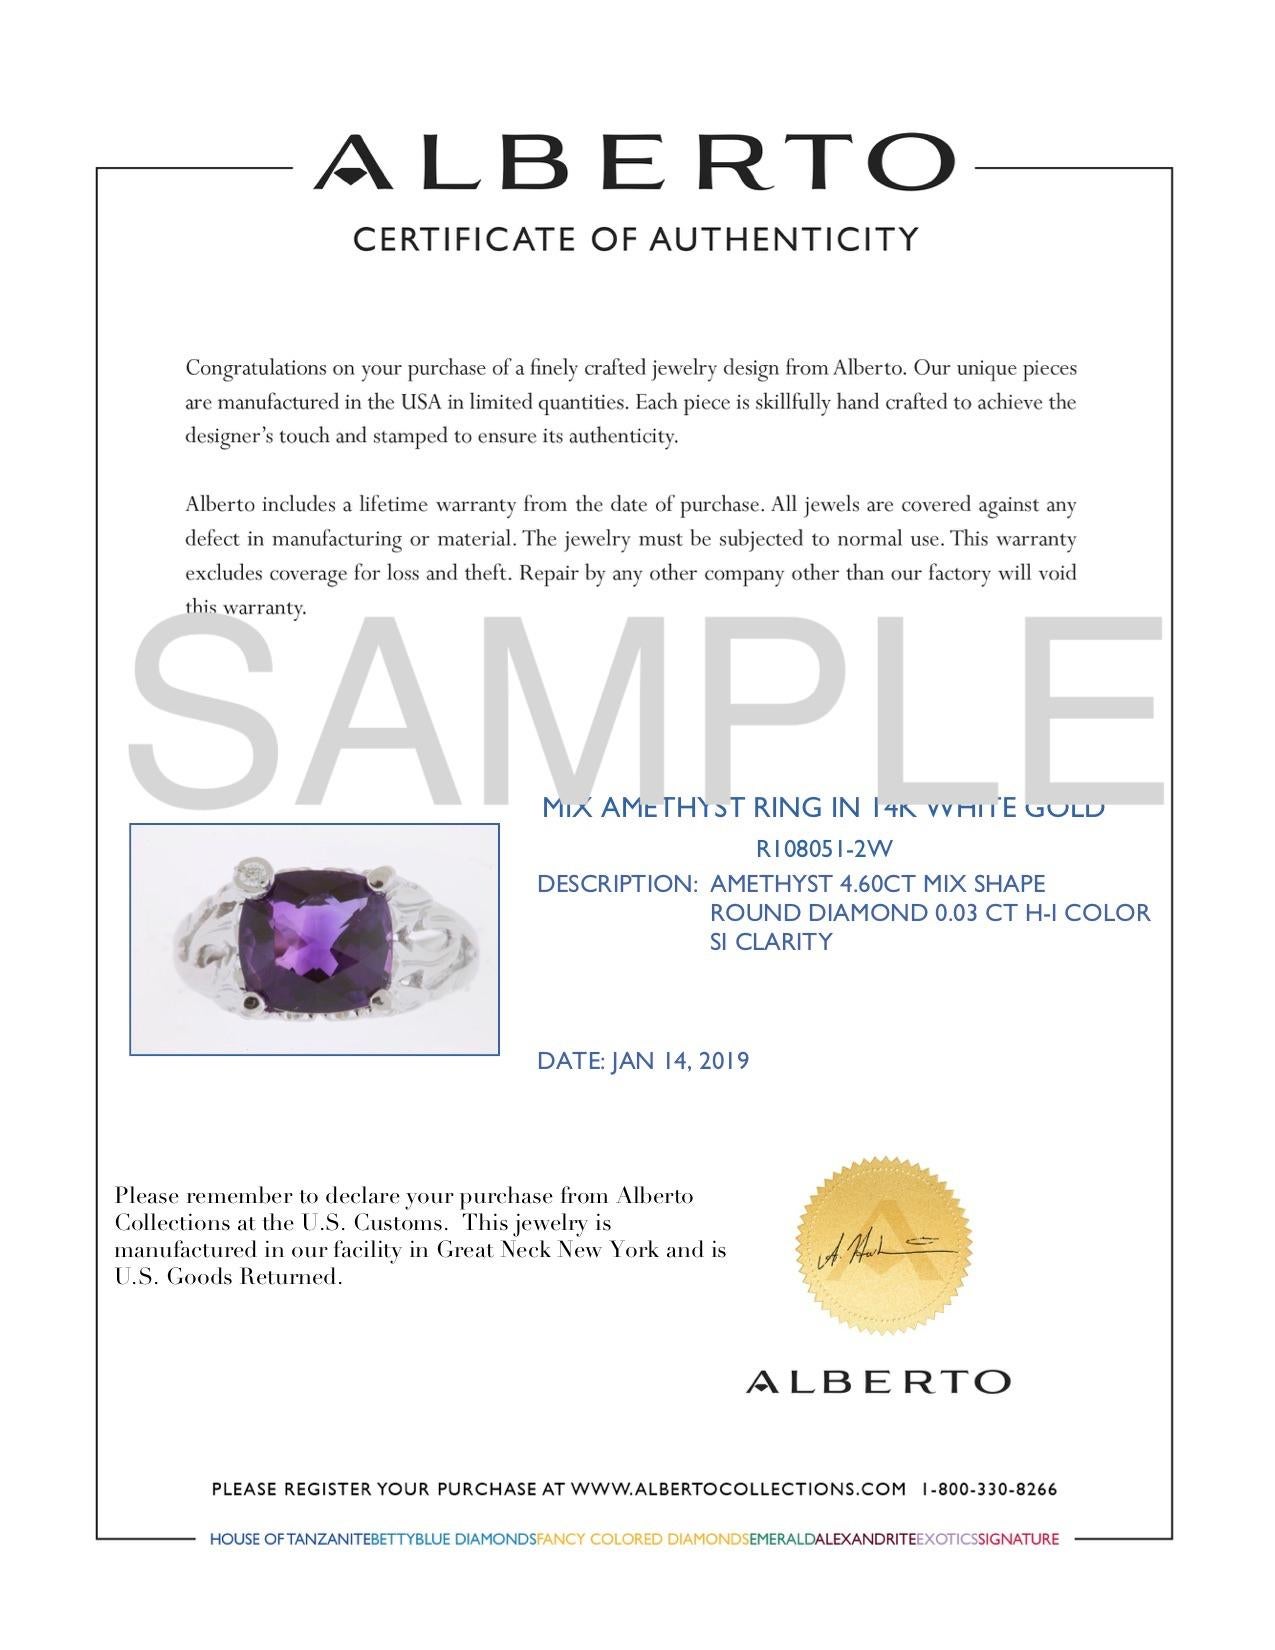 4.60 Carat Cushion Cut Amethyst and Round Diamond Cocktail Ring 14K White Gold 3